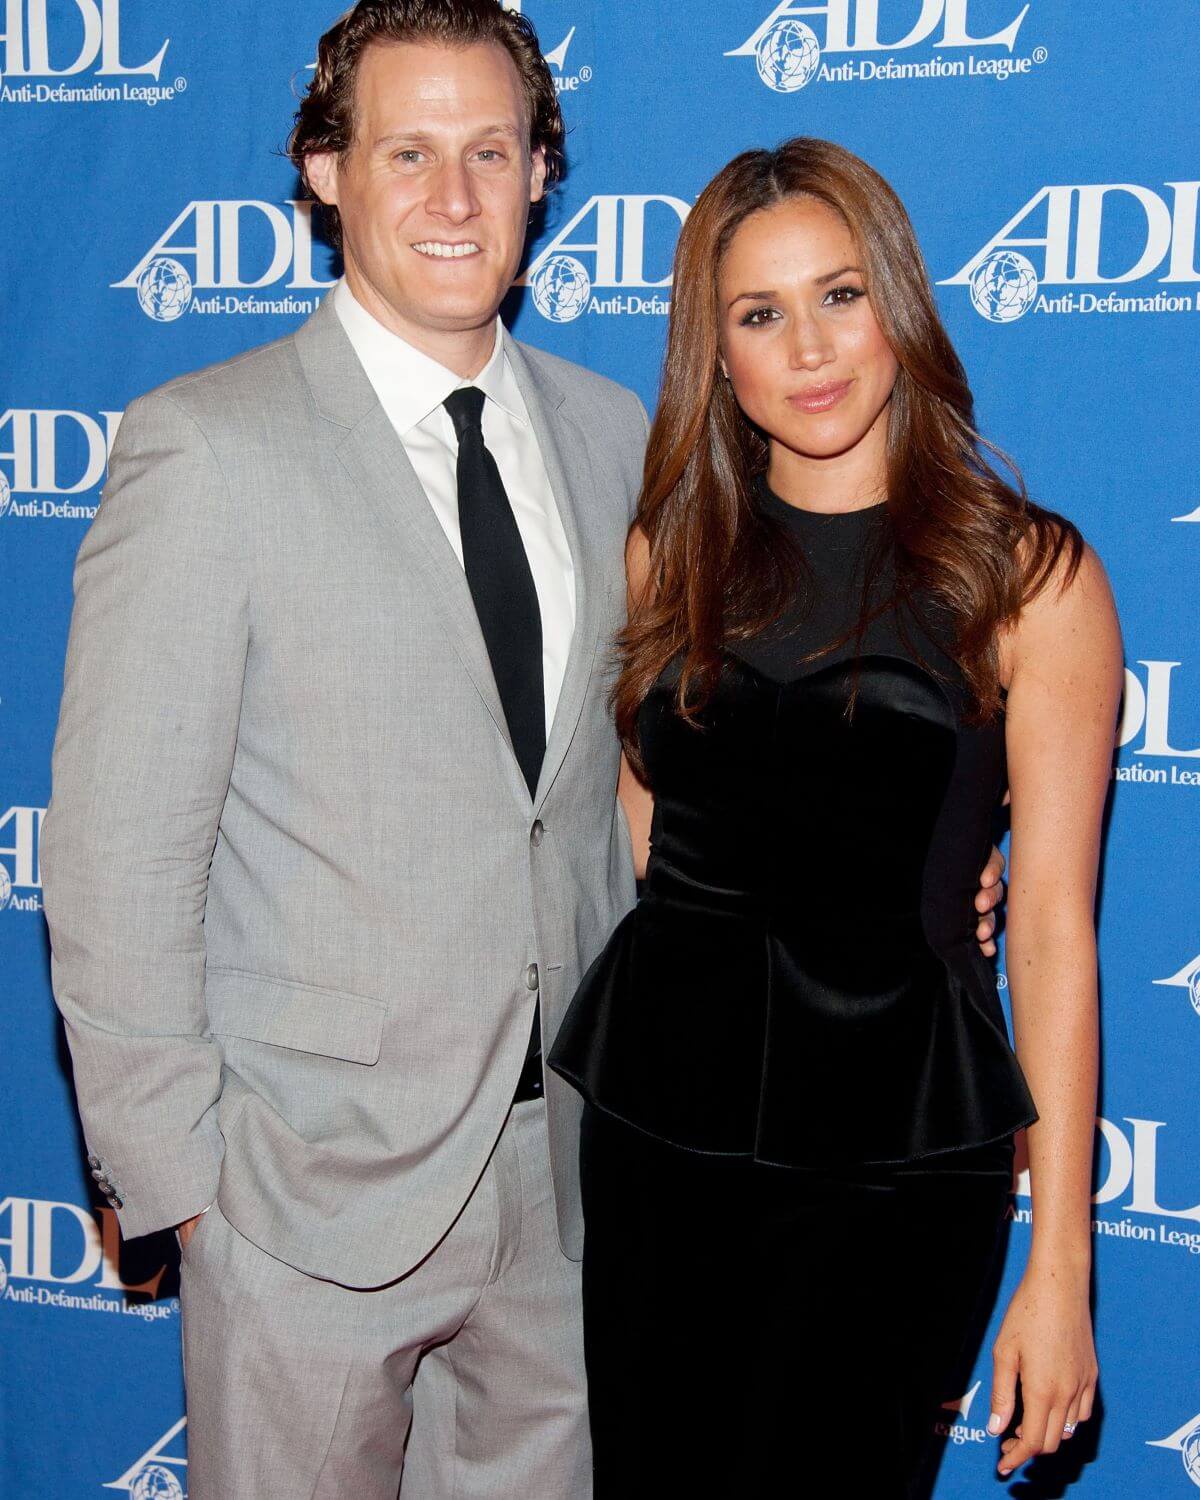 Meghan Markle and Trevor Engelson smile on the carpert at the Anti-Defamation League Entertainment Industry Awards Dinner